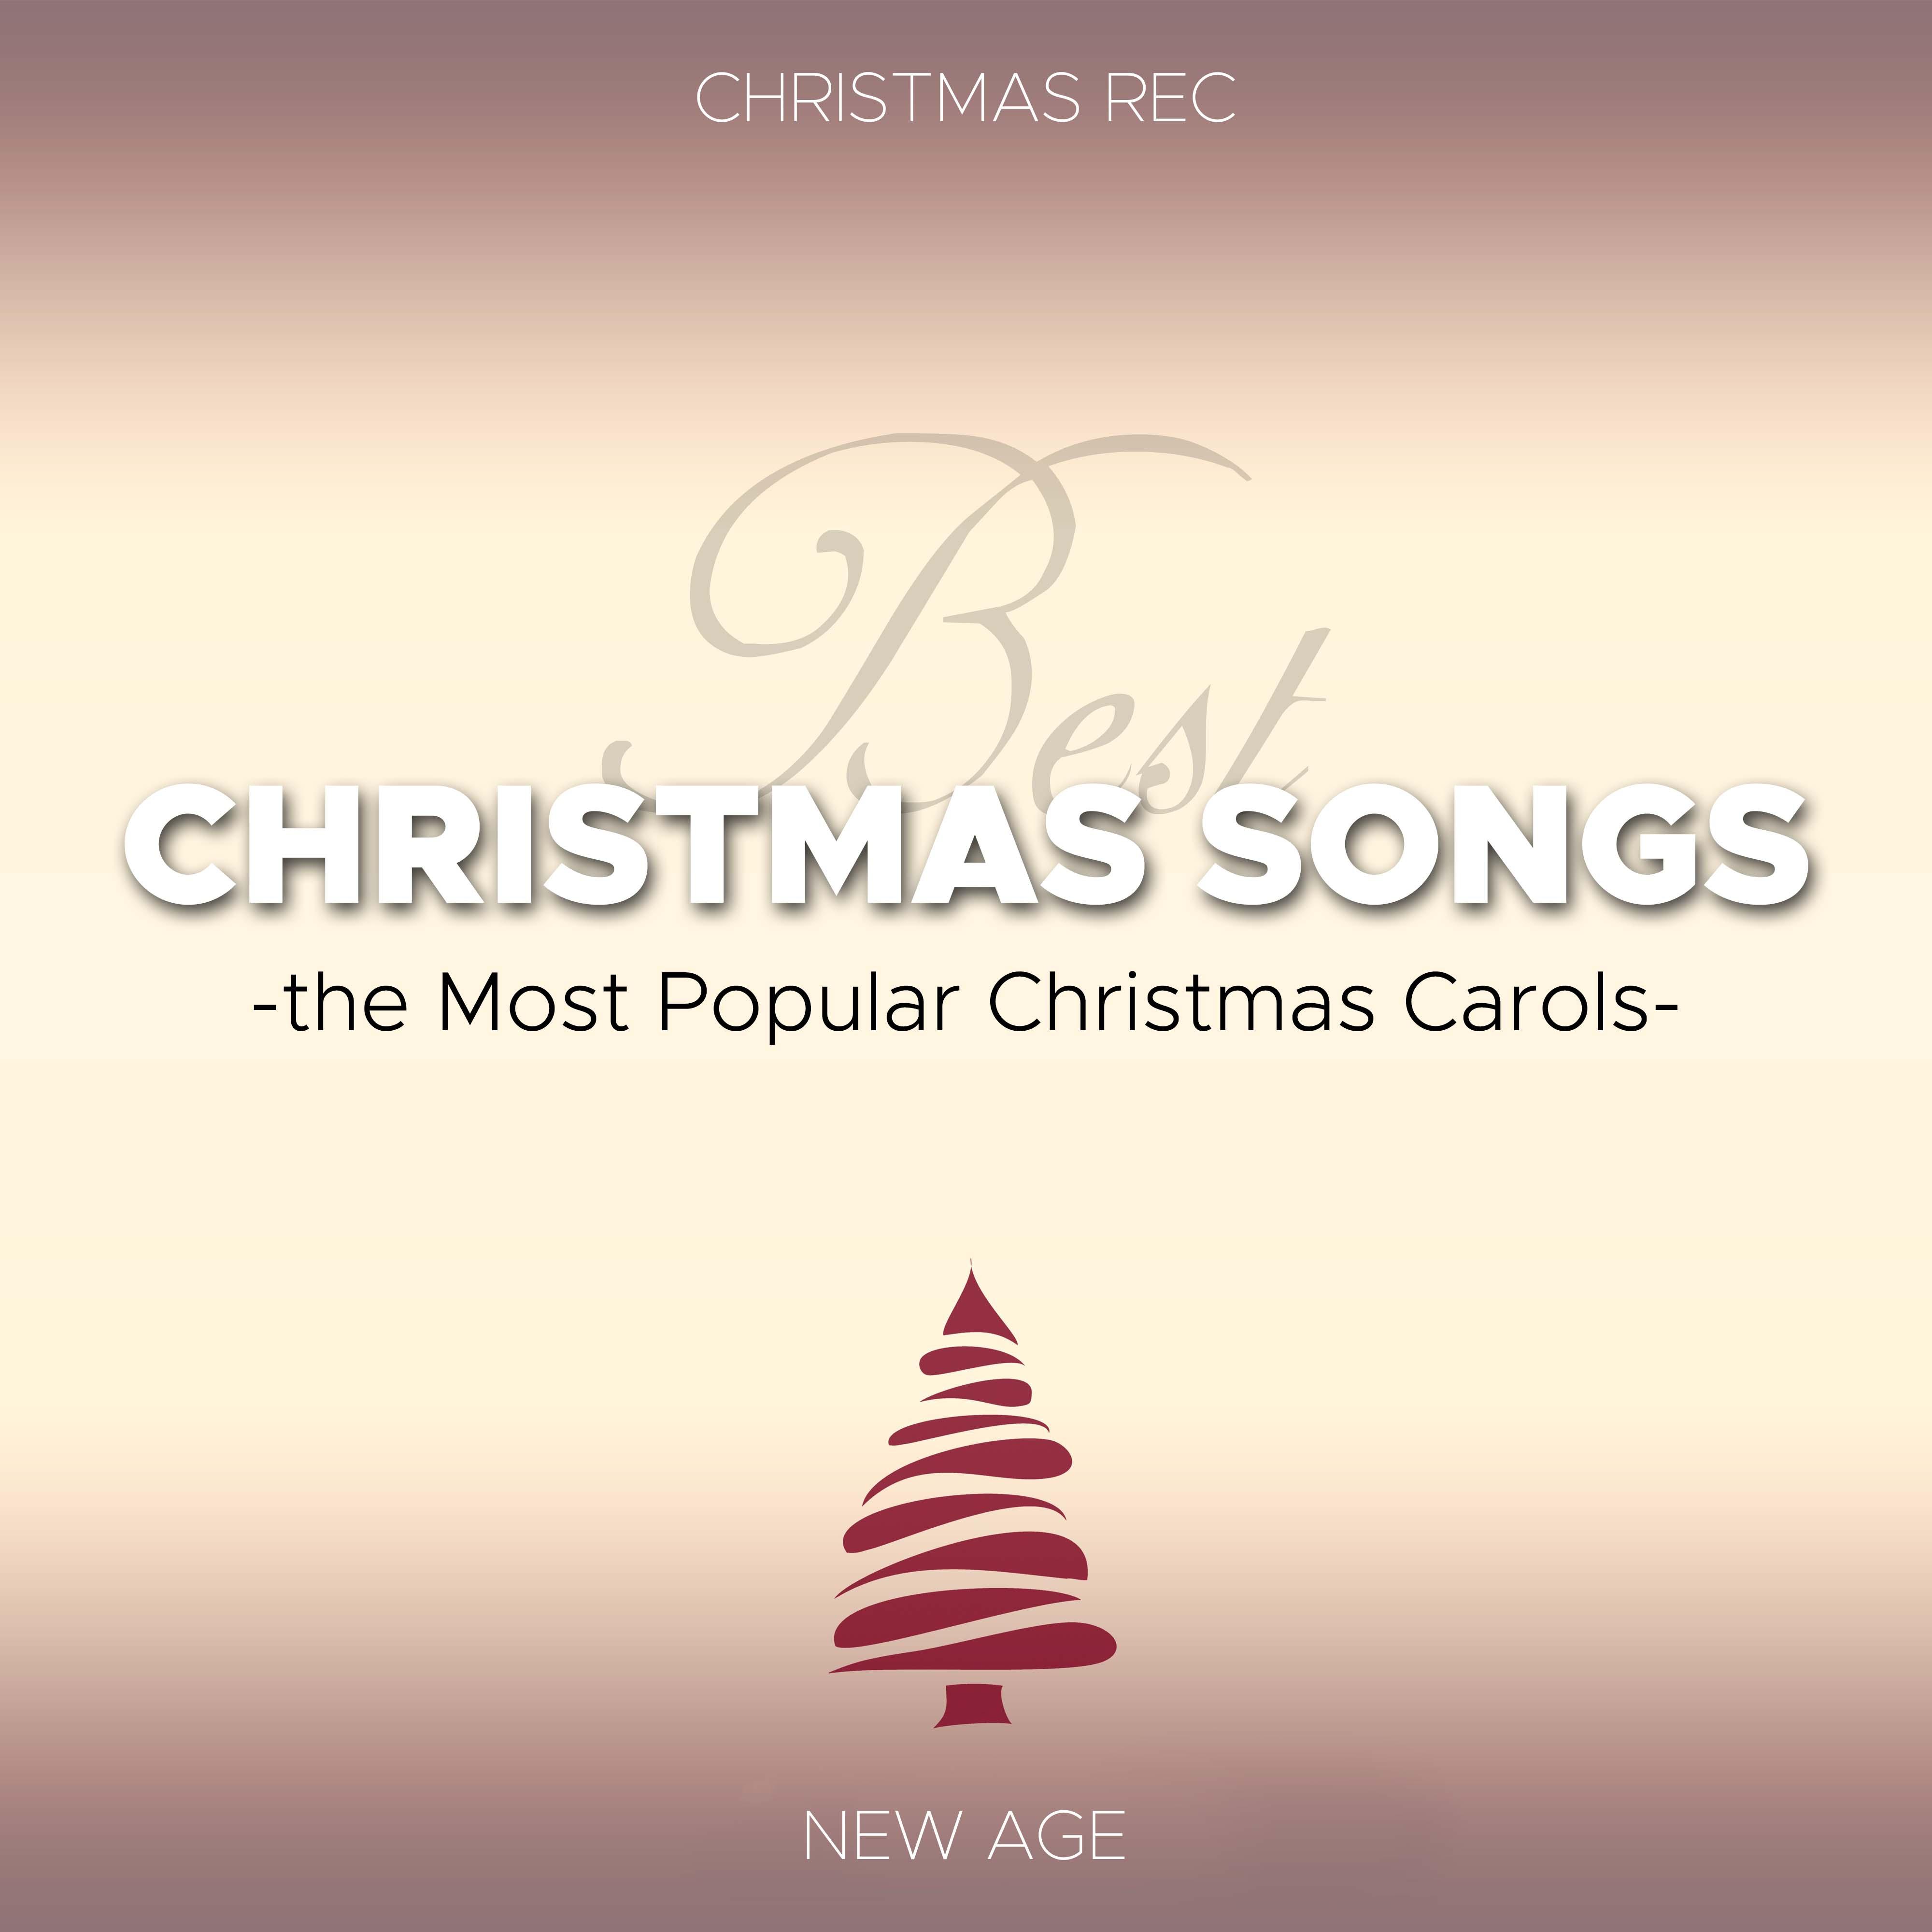 Best Christmas Songs - the Most Popular Christmas Carols with Instrumental Christmas Music, Piano Music and Traditional Carols